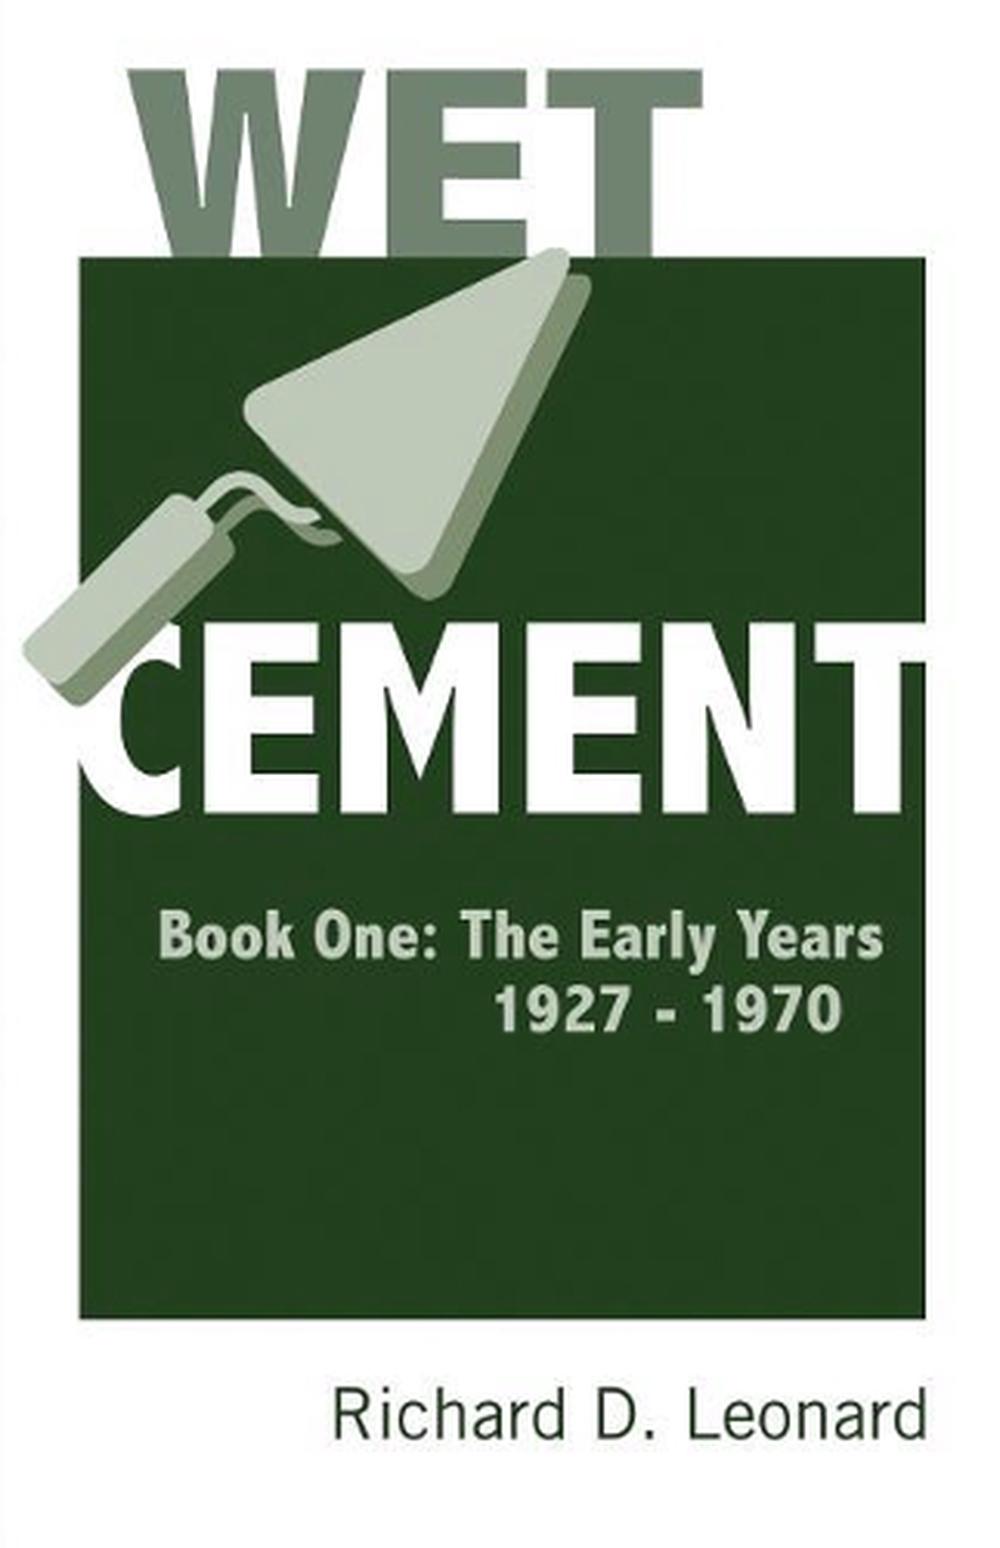 Wet Cement Book One: The Early Years 1927-1970 by Richard D. Leonard